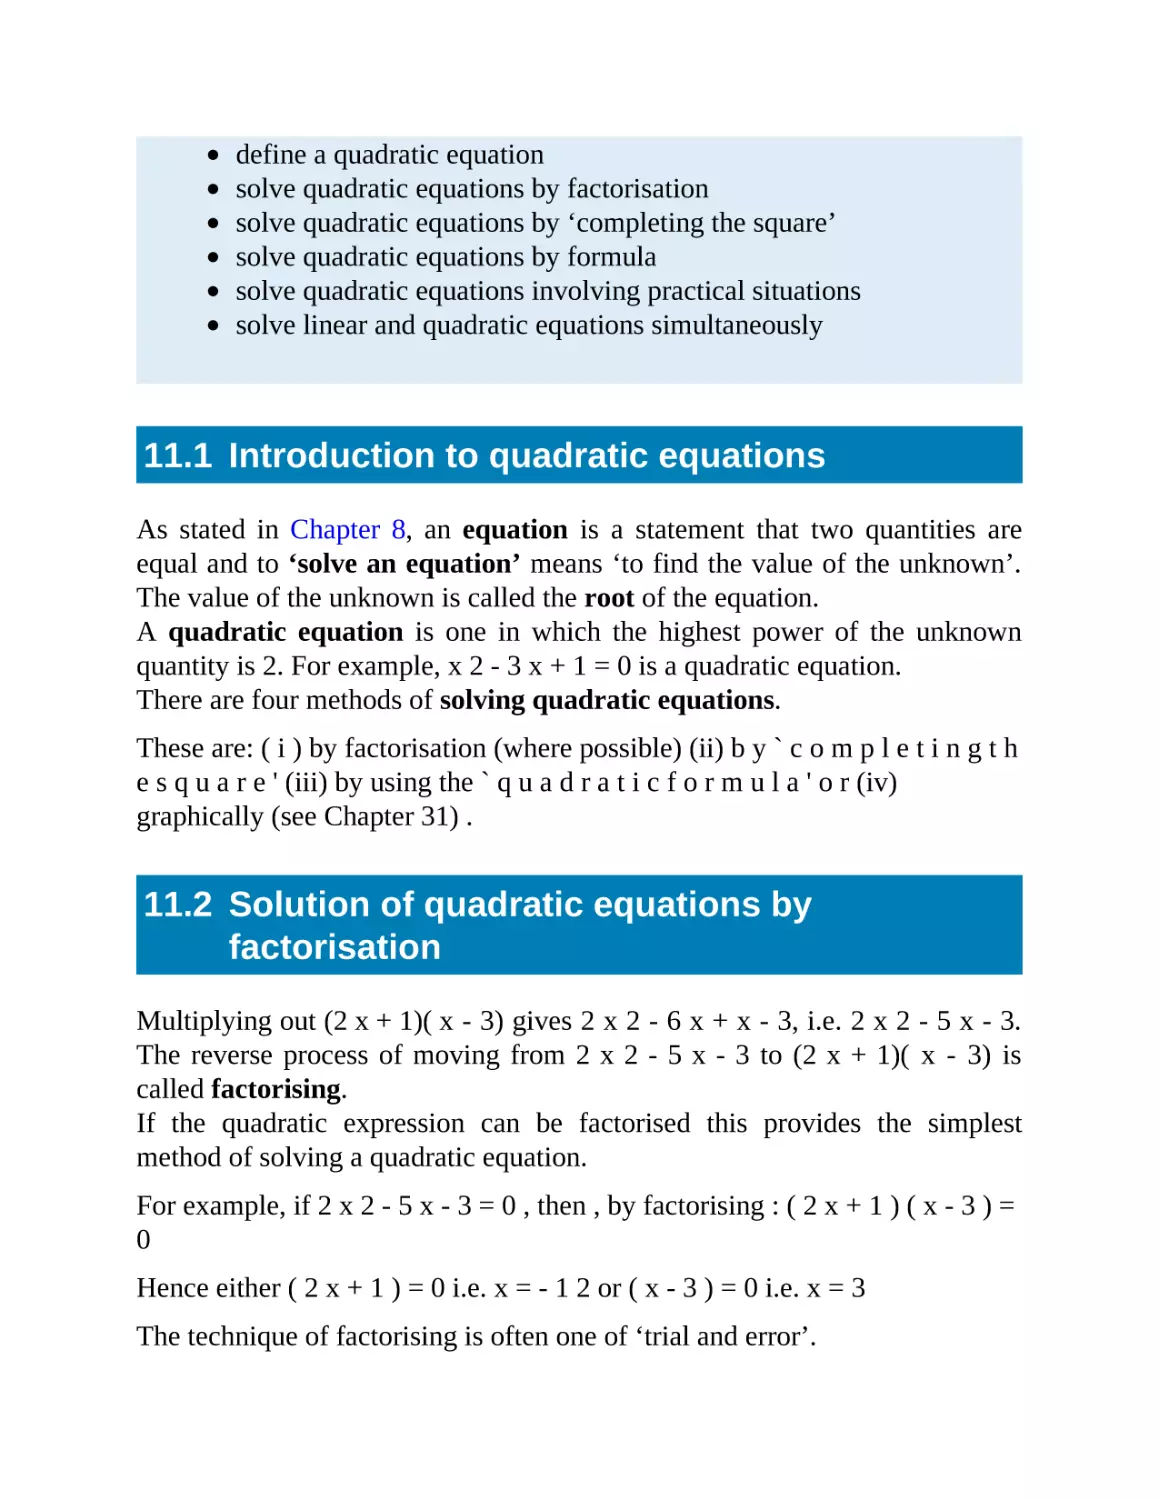 11.1 Introduction to quadratic equations
11.2 Solution of quadratic equations by factorisation